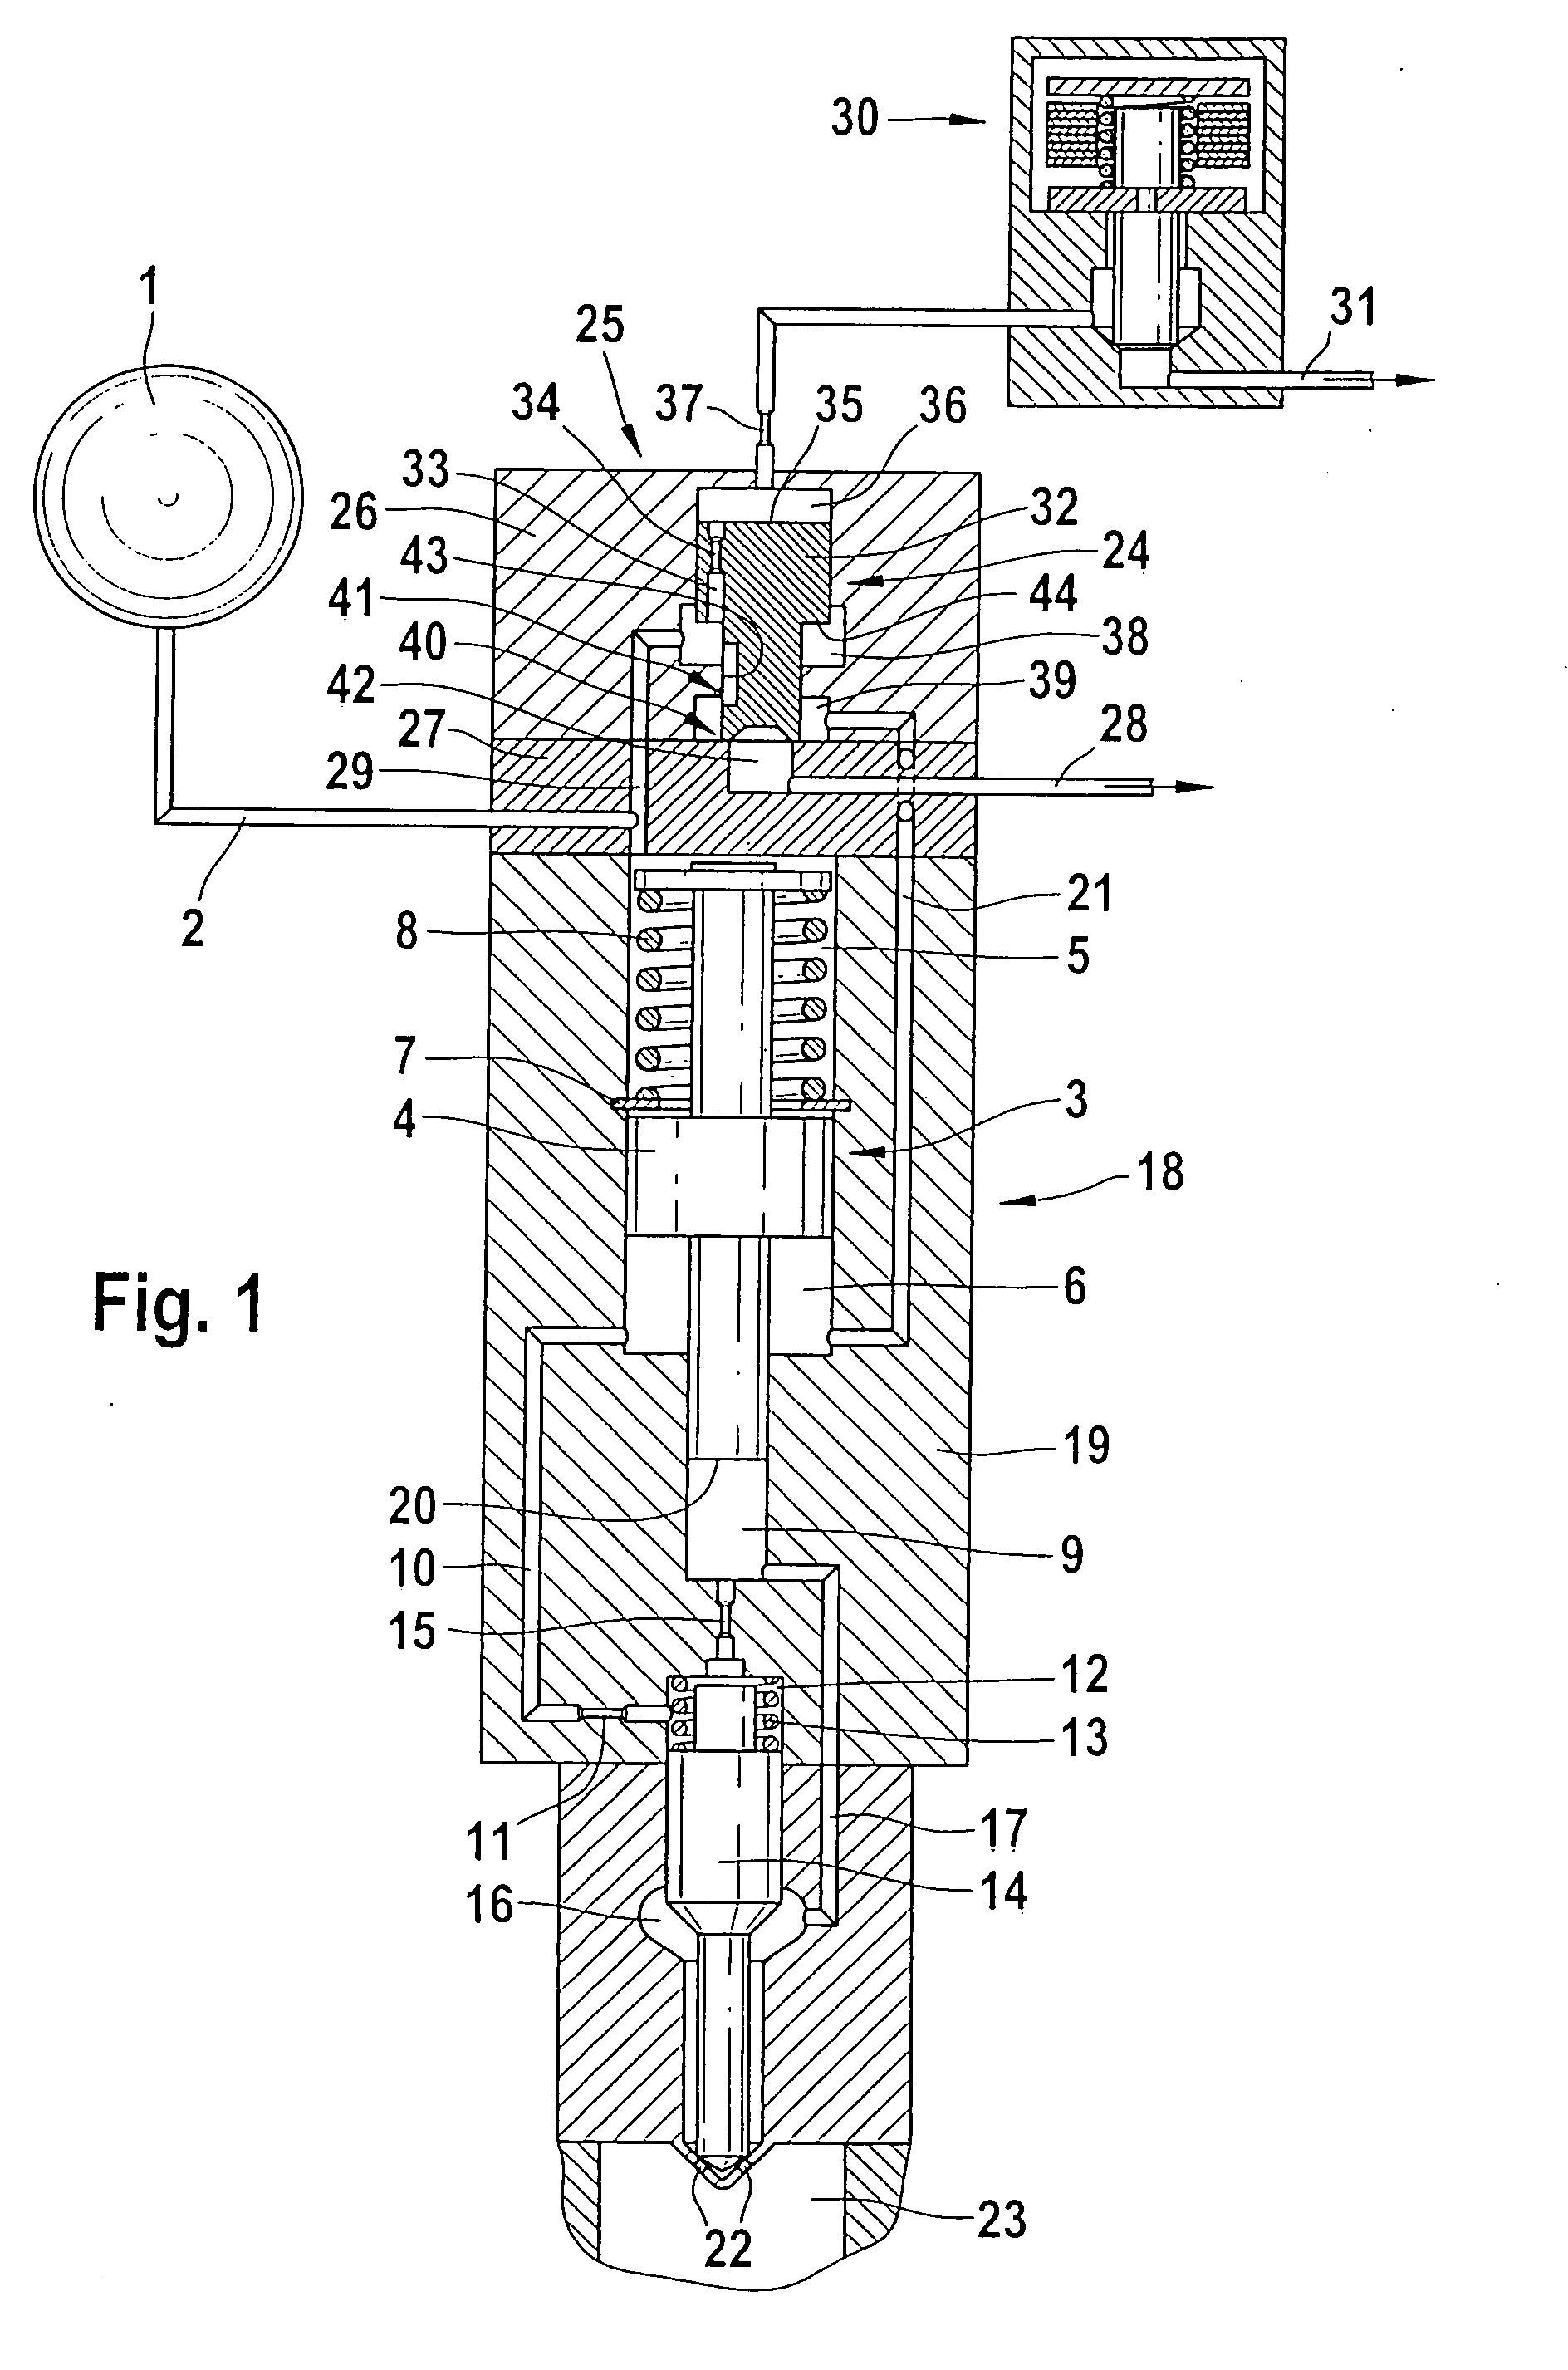 Fuel injector provided with provided with a pressure transmitter controlled by a servo valve